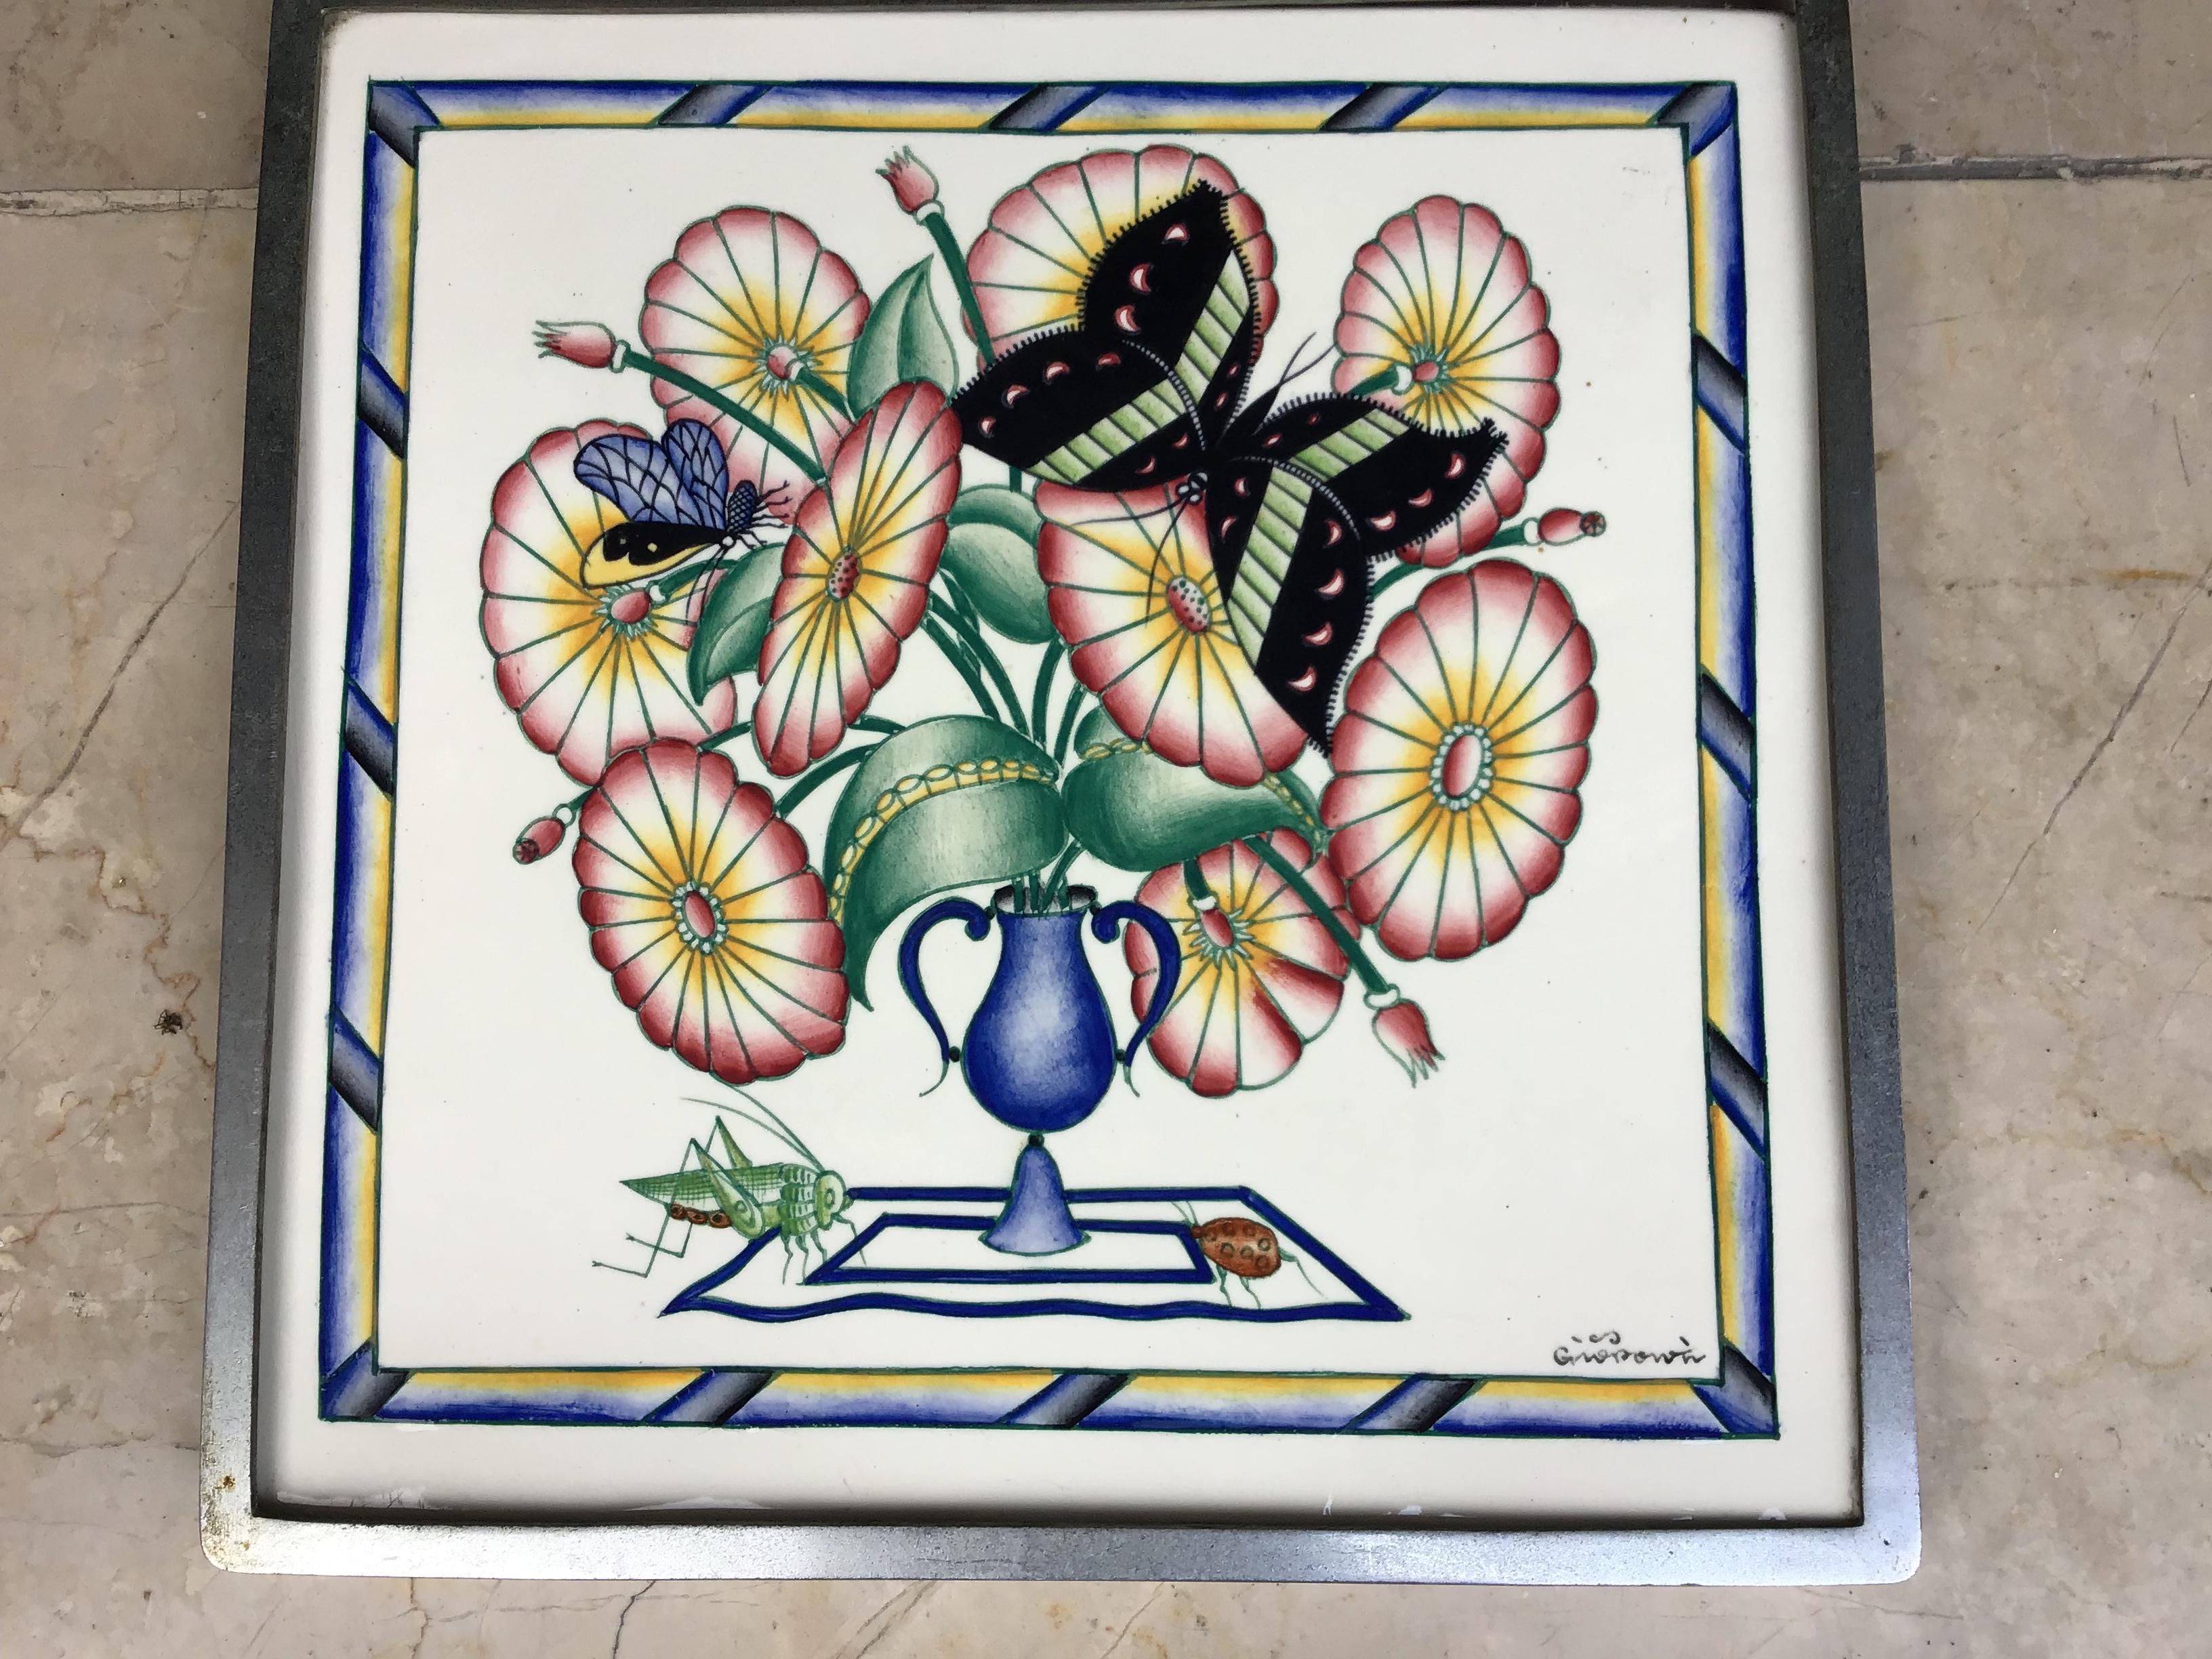 Gio Ponti Richard Ginori San Cristoforo ceramic tile 1930, with polychrome decorations depicting flowers pot with insects, Italy.